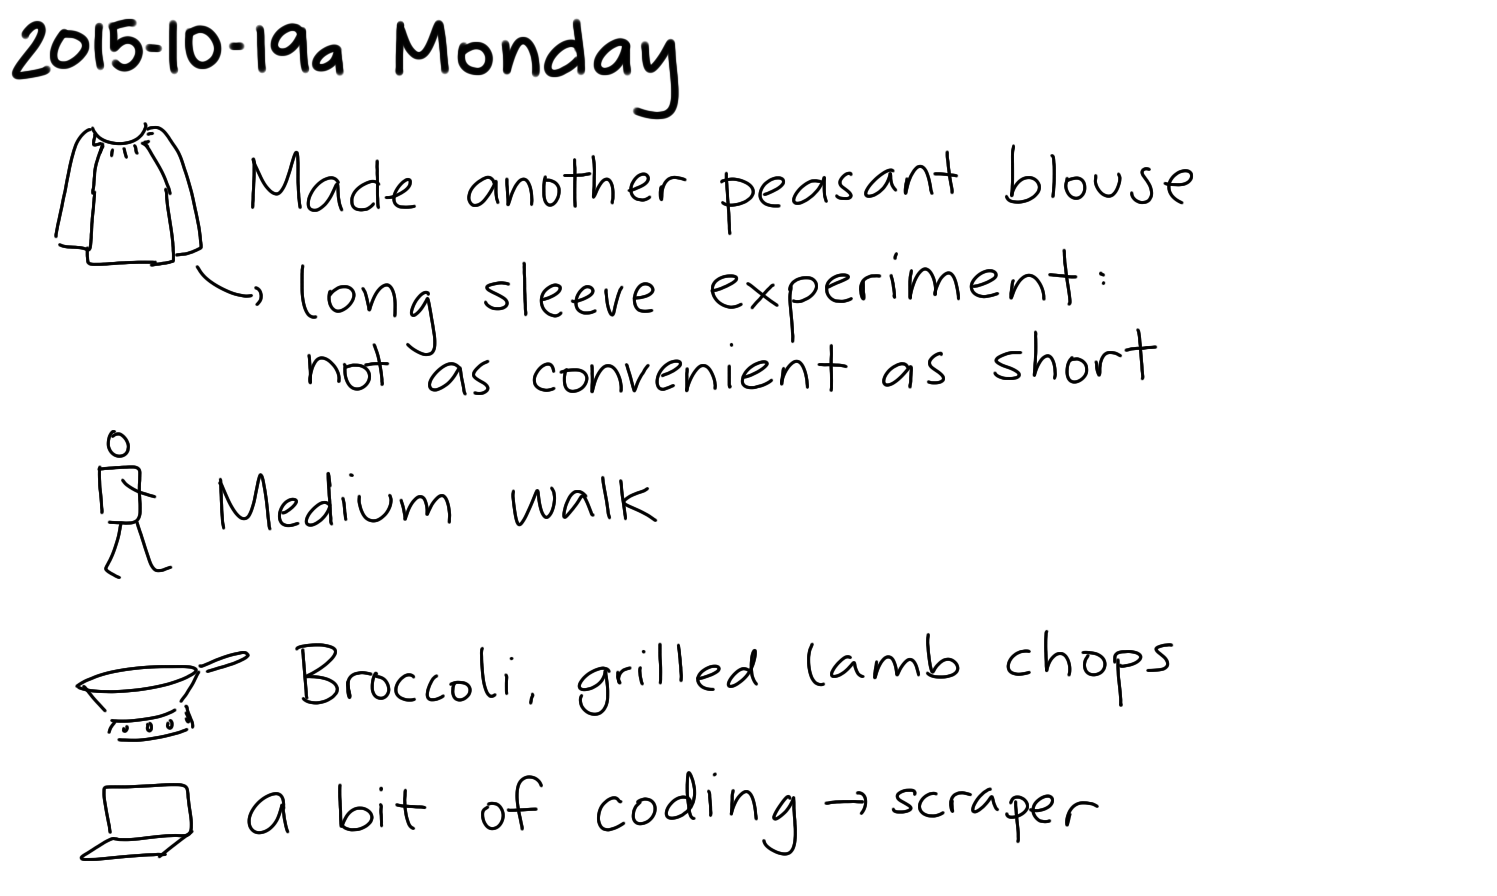 2015-10-19a Monday -- index card #journal.png